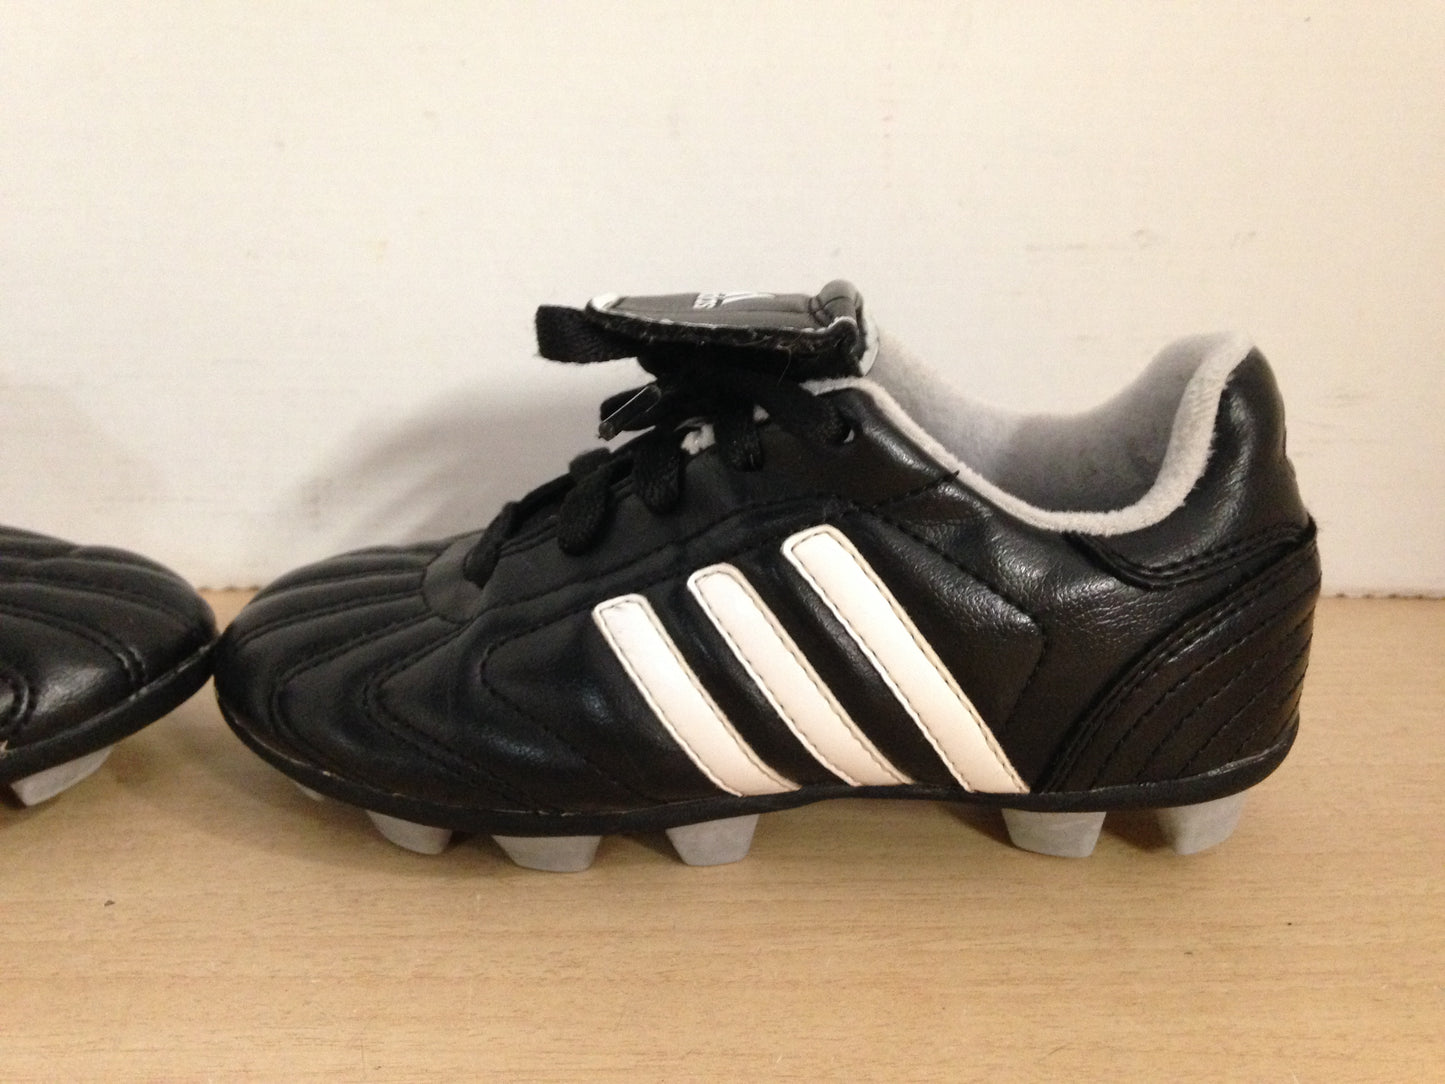 Soccer Shoes Cleats Child Size 12 Adidas Black White Grey Excellent